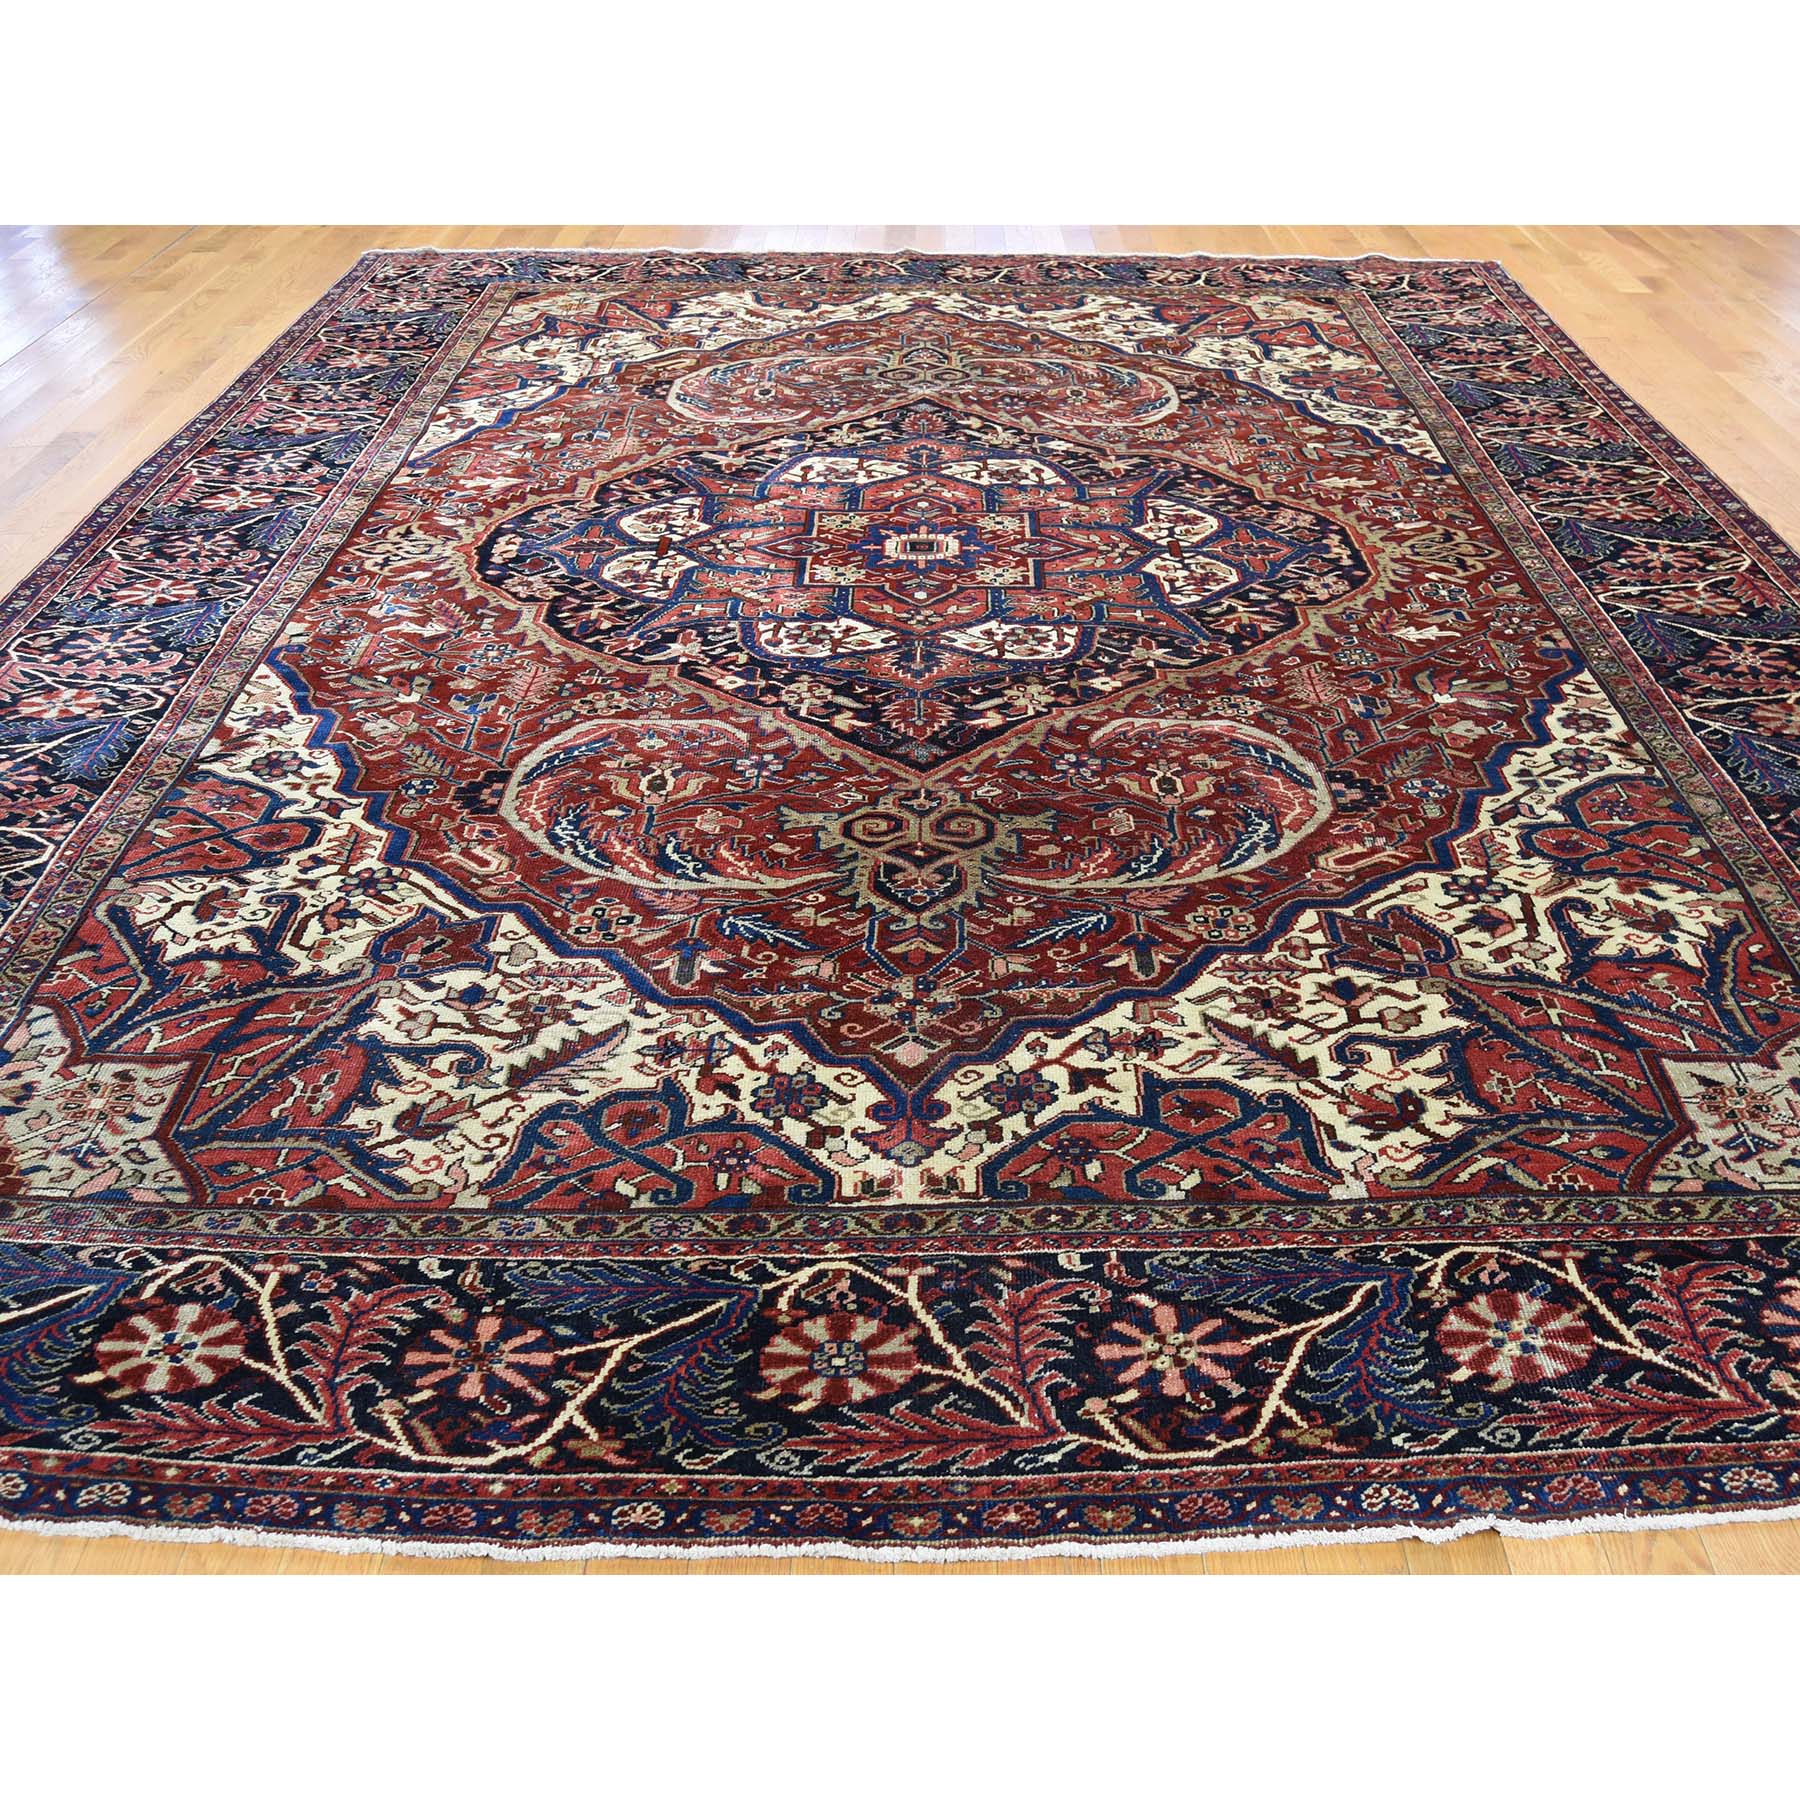 10-4 x13-3  Hand-Knotted Vintage Persian Heriz Even Wear Clean Circa 1930 Oriental Rug 